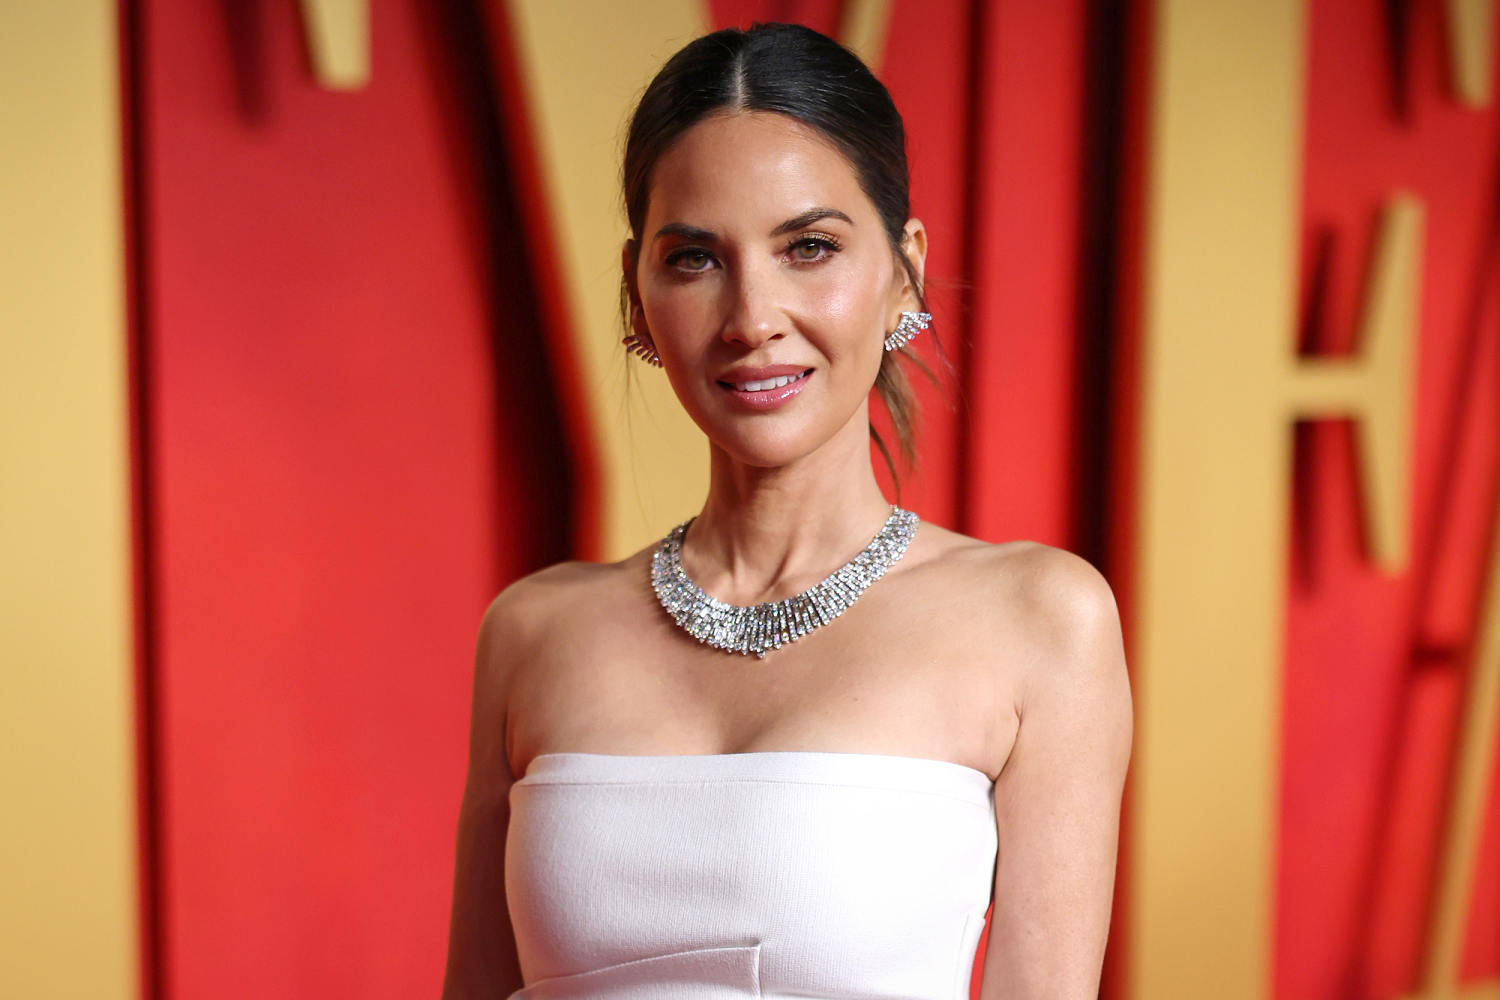 Olivia Munn had hysterectomy amid cancer treatment, froze her eggs in hopes of more kids